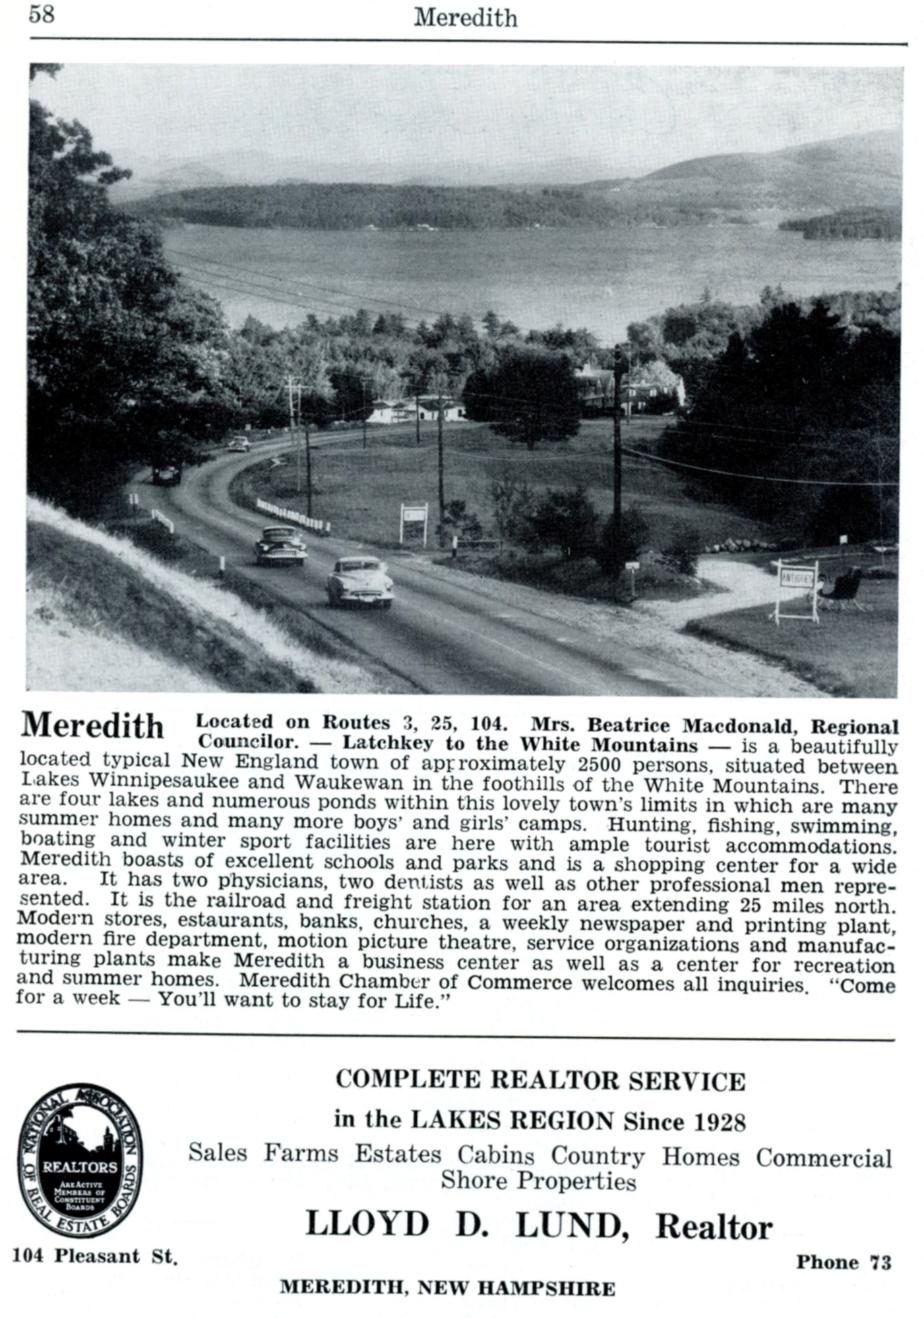 Meredith New Hampshire Travel Guide - 1953